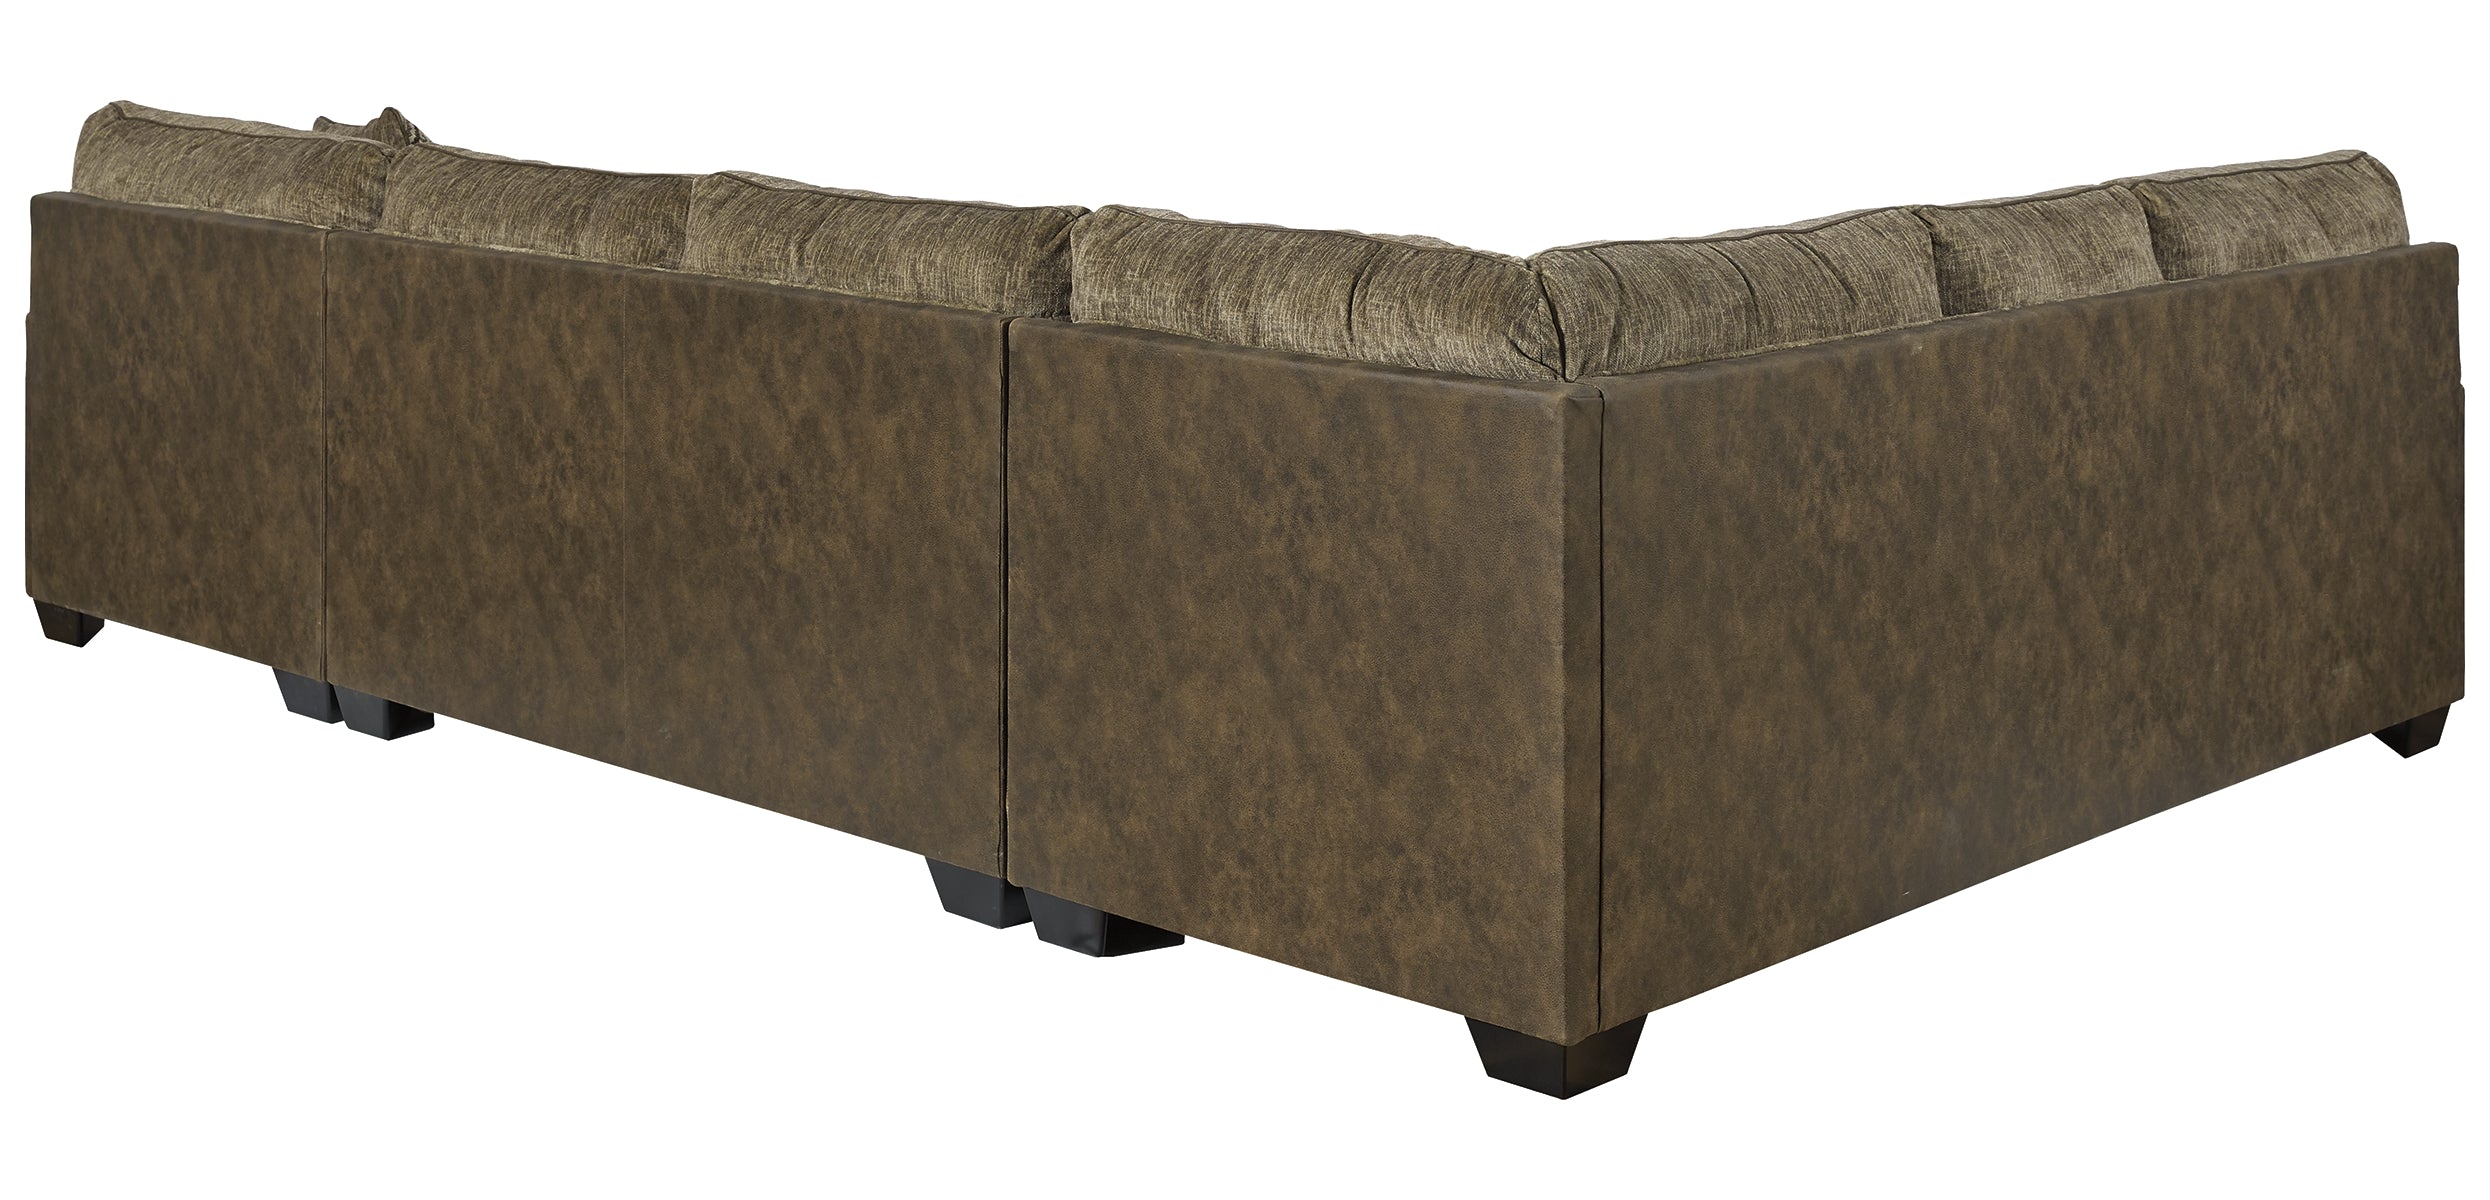 Abalone 3-Piece Sectional with Ottoman